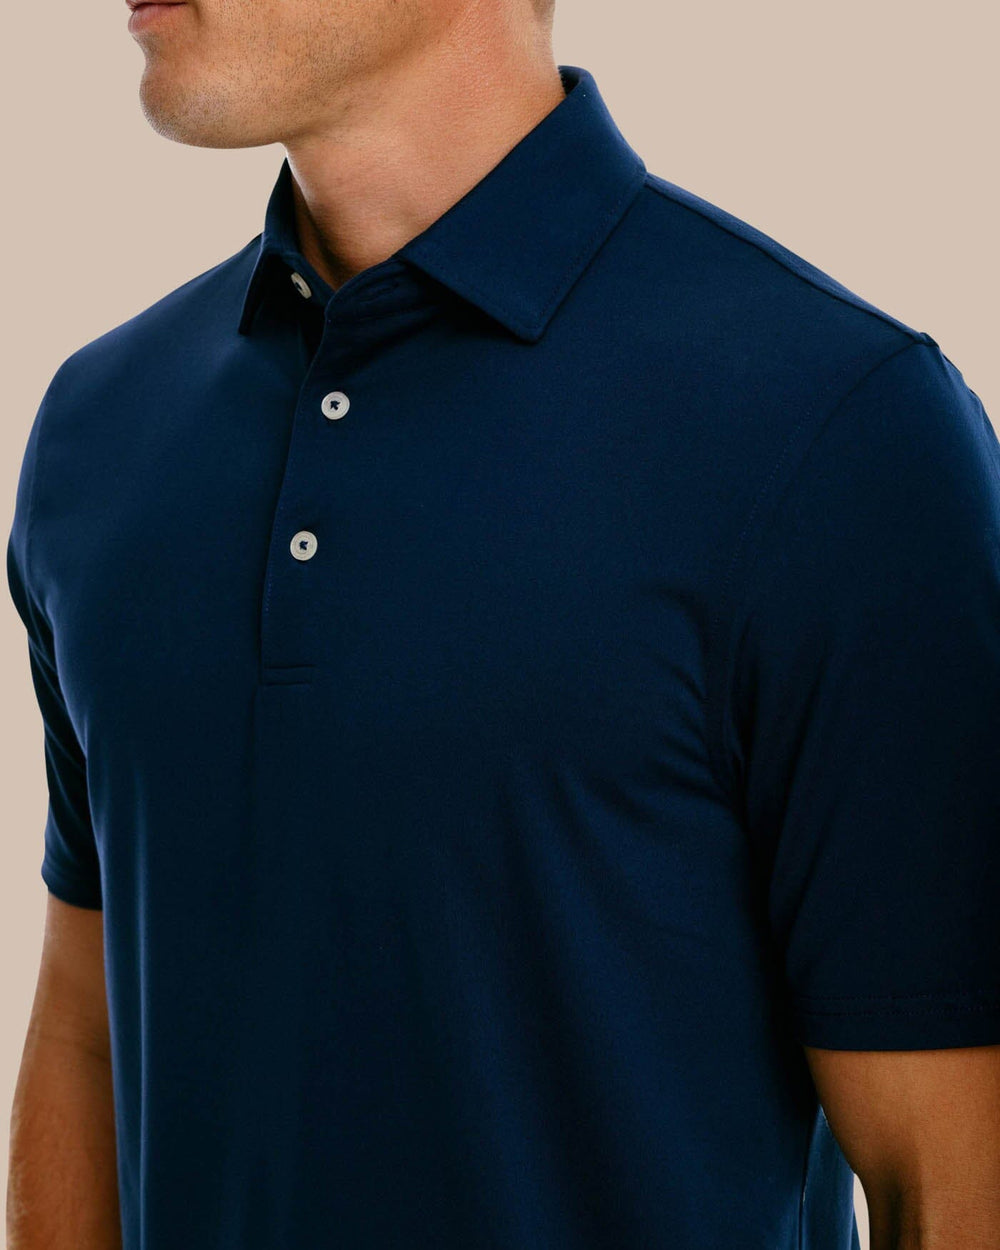 The collar of the Men's Ryder Performance Polo Shirt by Southern Tide - True Navy